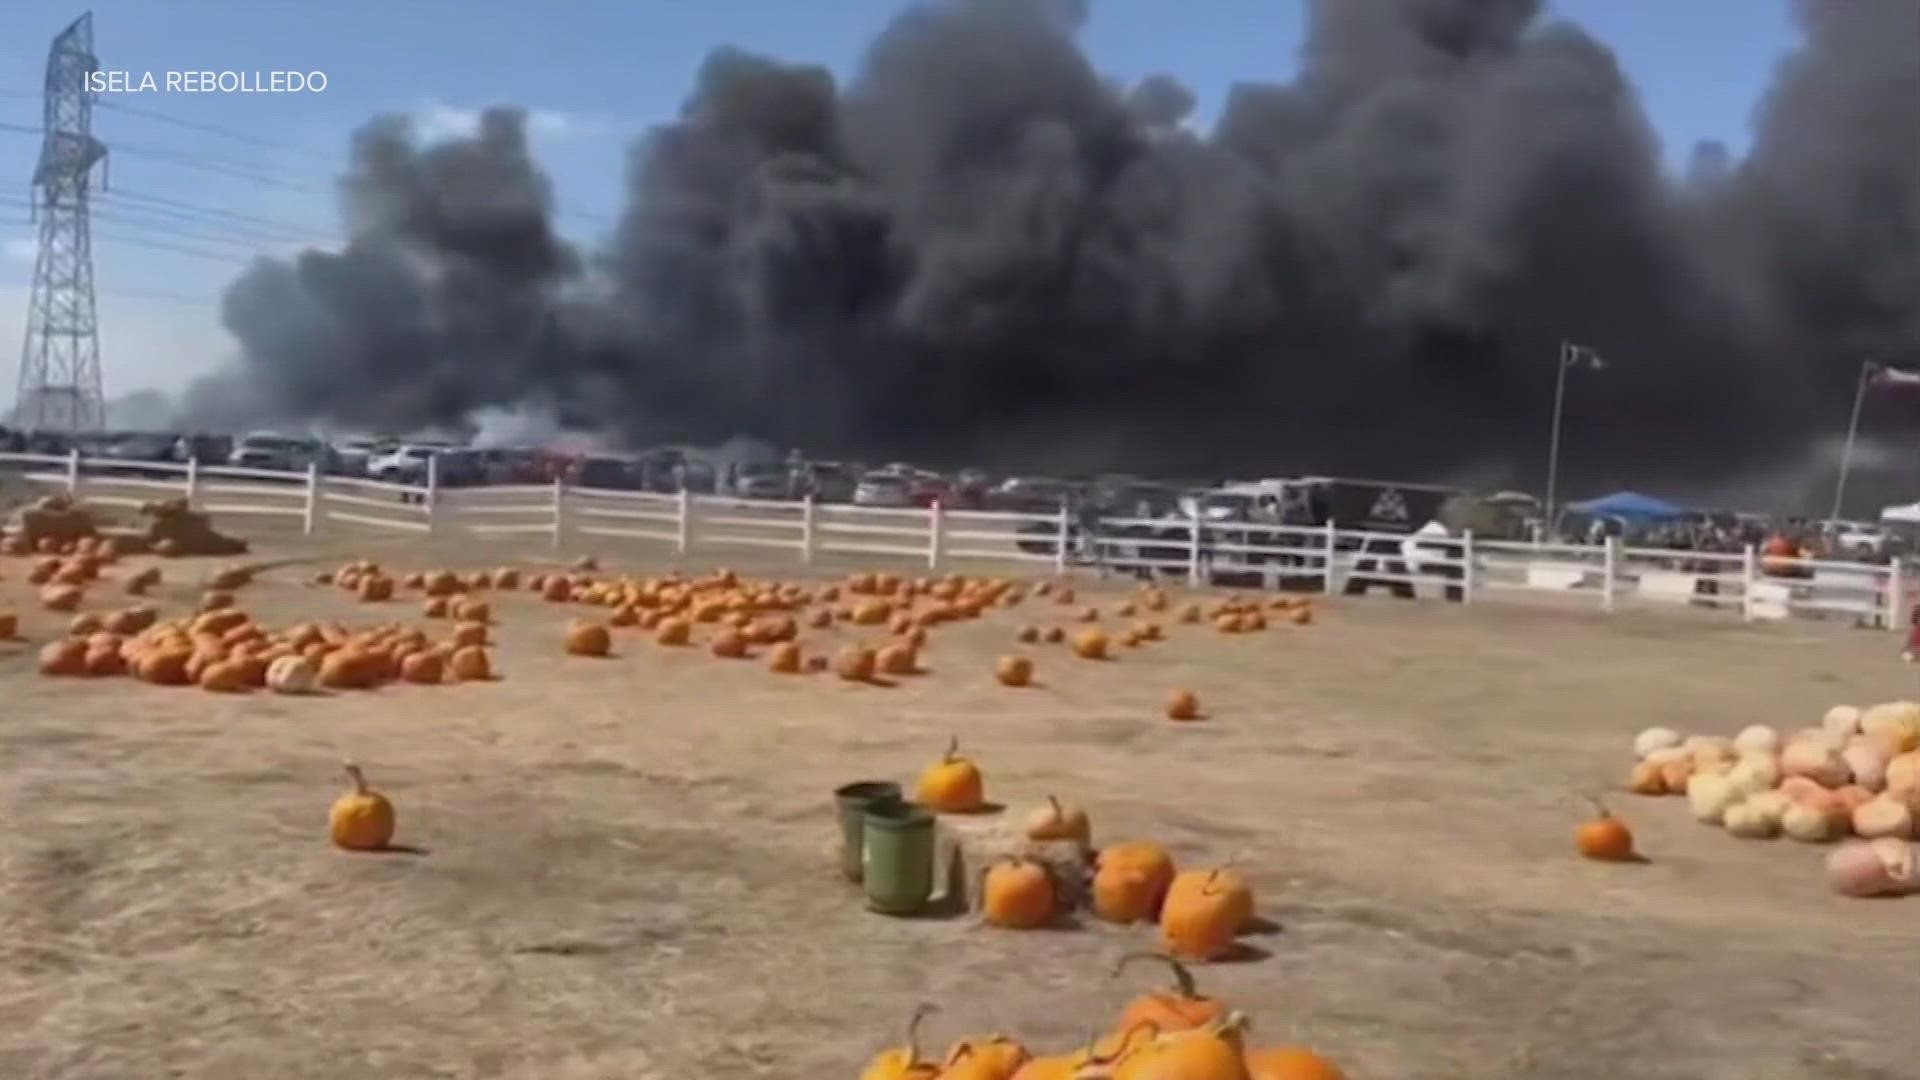 More than 70 cars were destroyed in a fire at the Robinson Family Farm in Temple, Texas.